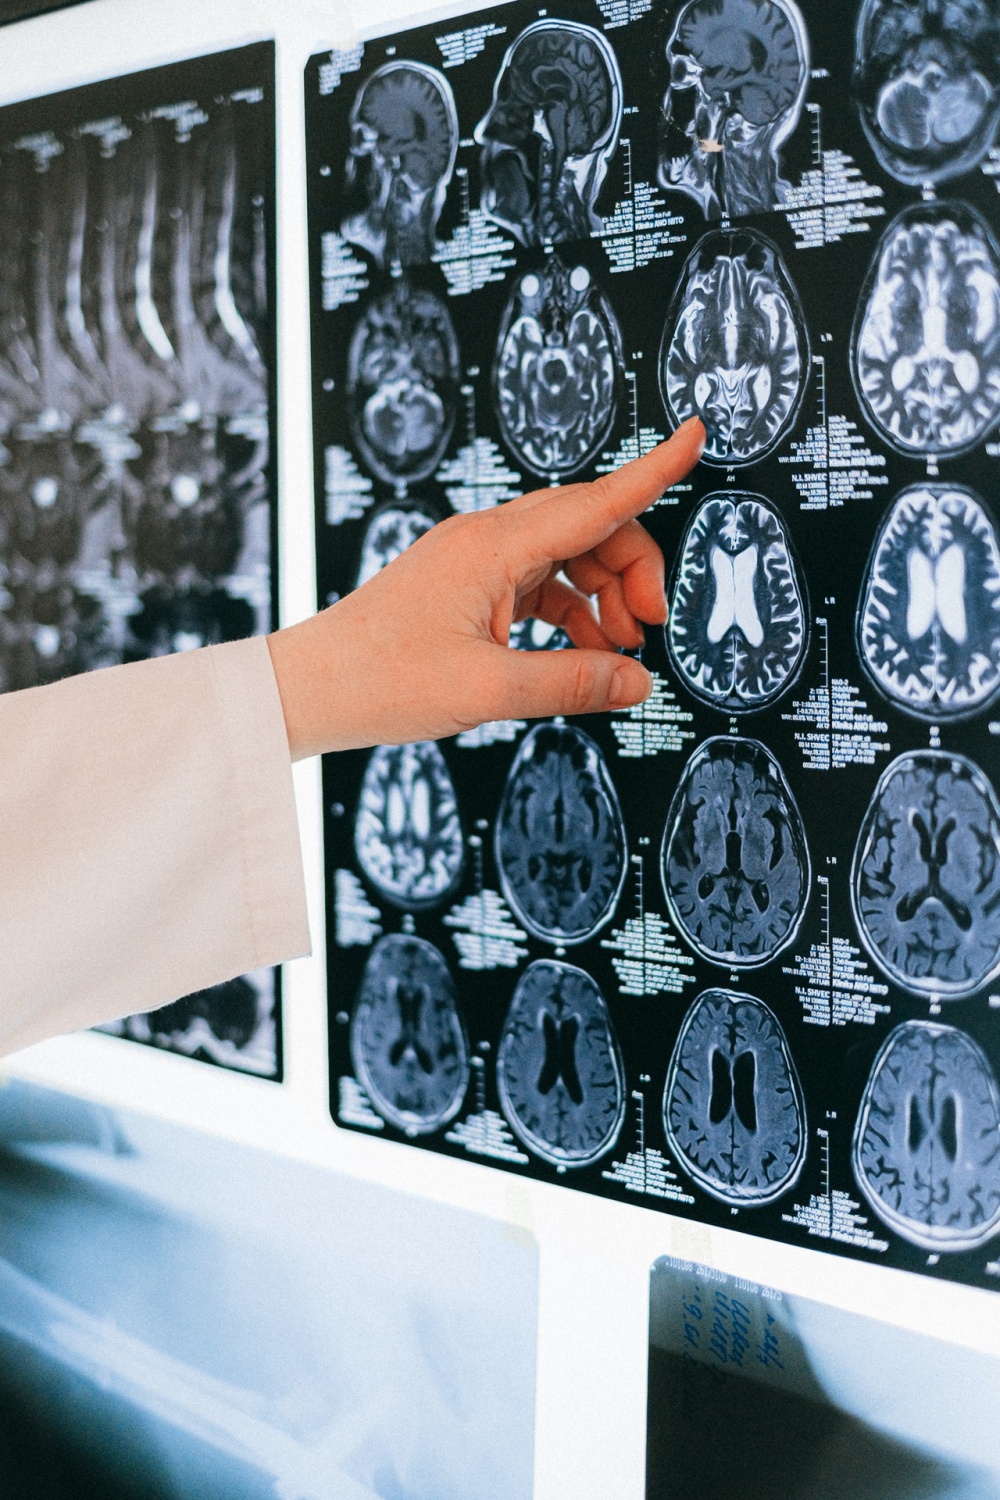 5 Pro Tips To Search For a Quality Neurologist